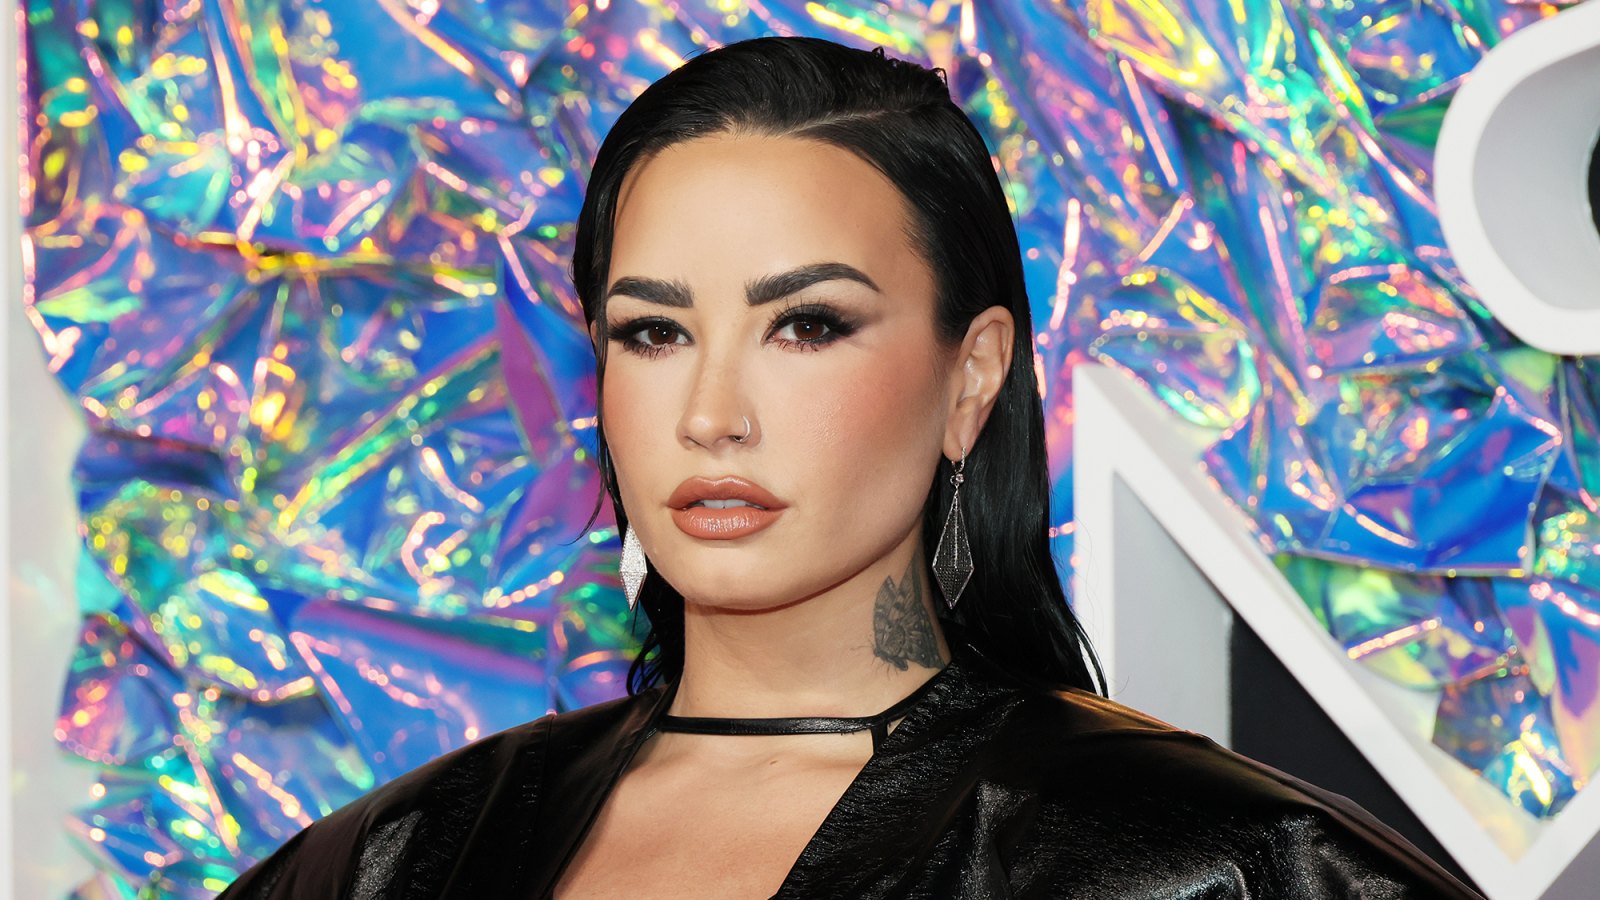 https://www.usmagazine.com/wp-content/uploads/2023/09/Demi-Lovato-Wrote-Cool-for-the-Summer-About-Her-Secret-Romance-With-Another-Famous-Woman-01.jpg?crop=0px%2C8px%2C2000px%2C1131px&resize=1600%2C900&quality=86&strip=all